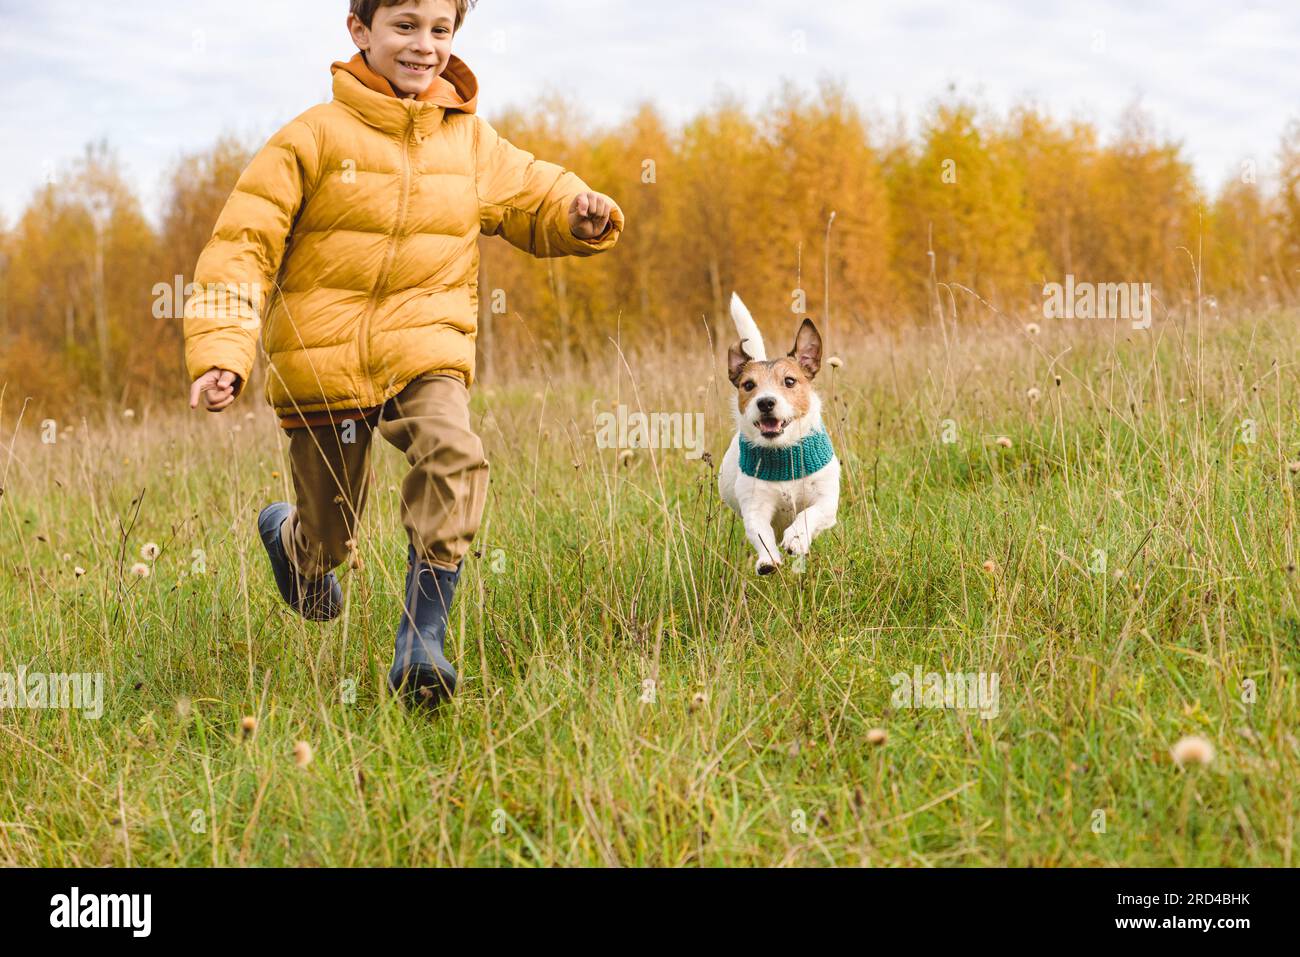 Happy smiling kid and his dog running and playing in Autumn meadow Stock Photo